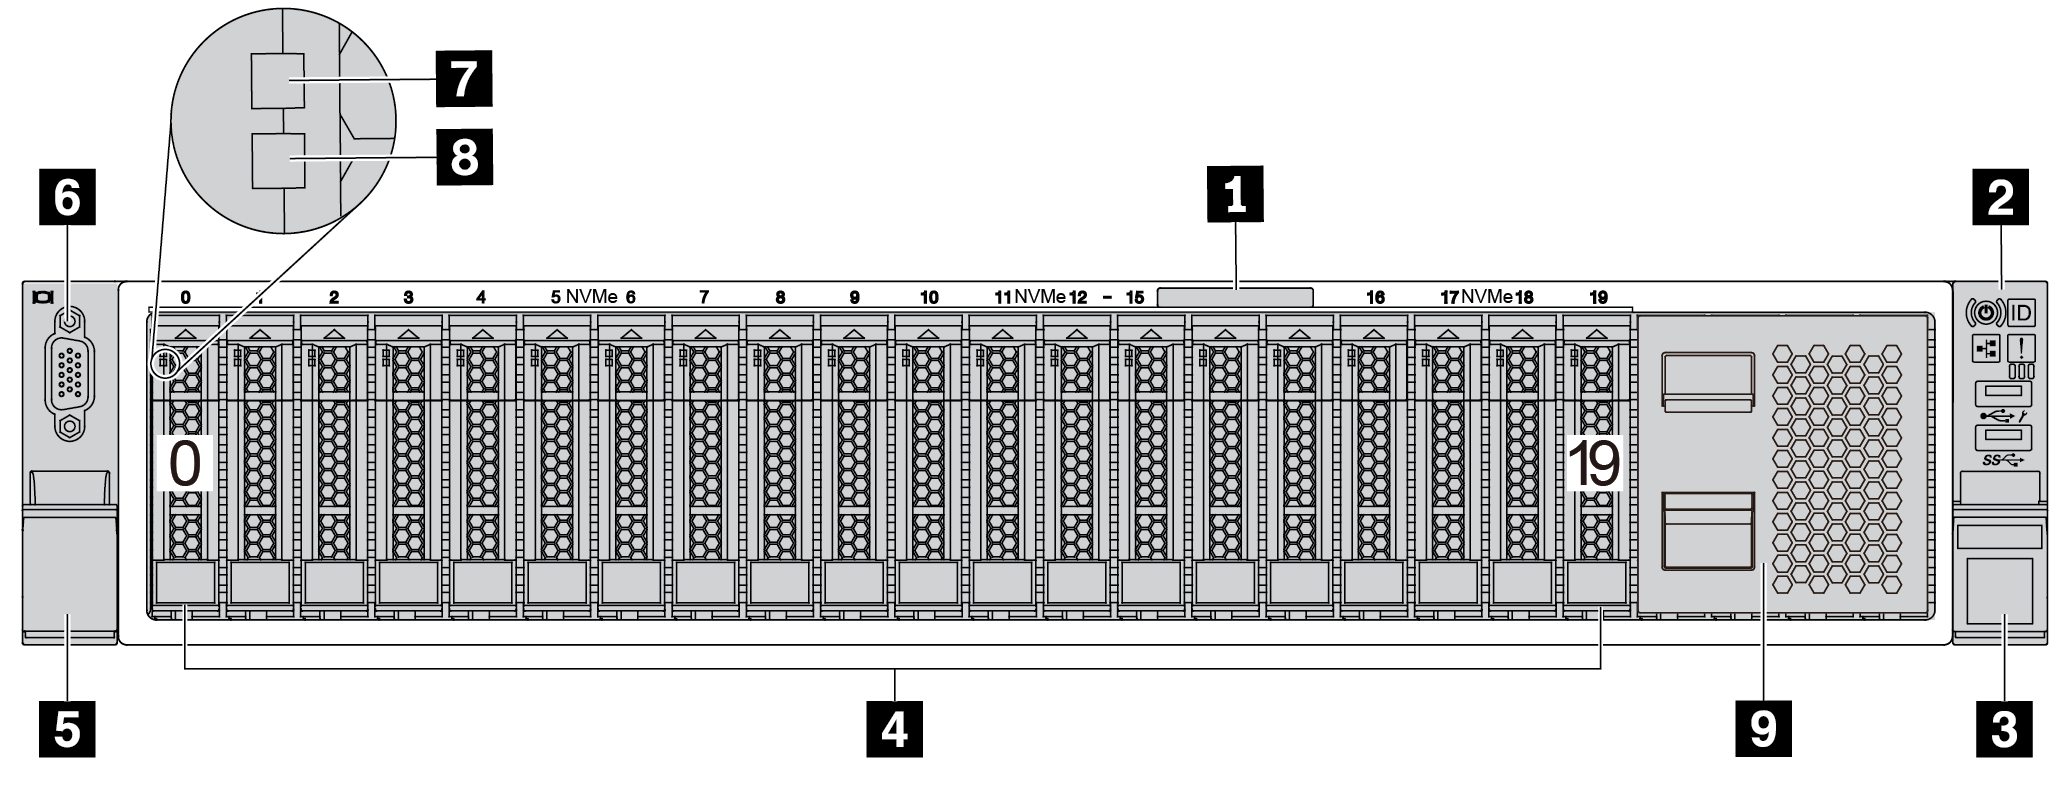 Front view of server models with twenty 2.5-inch drive bays (0–19)